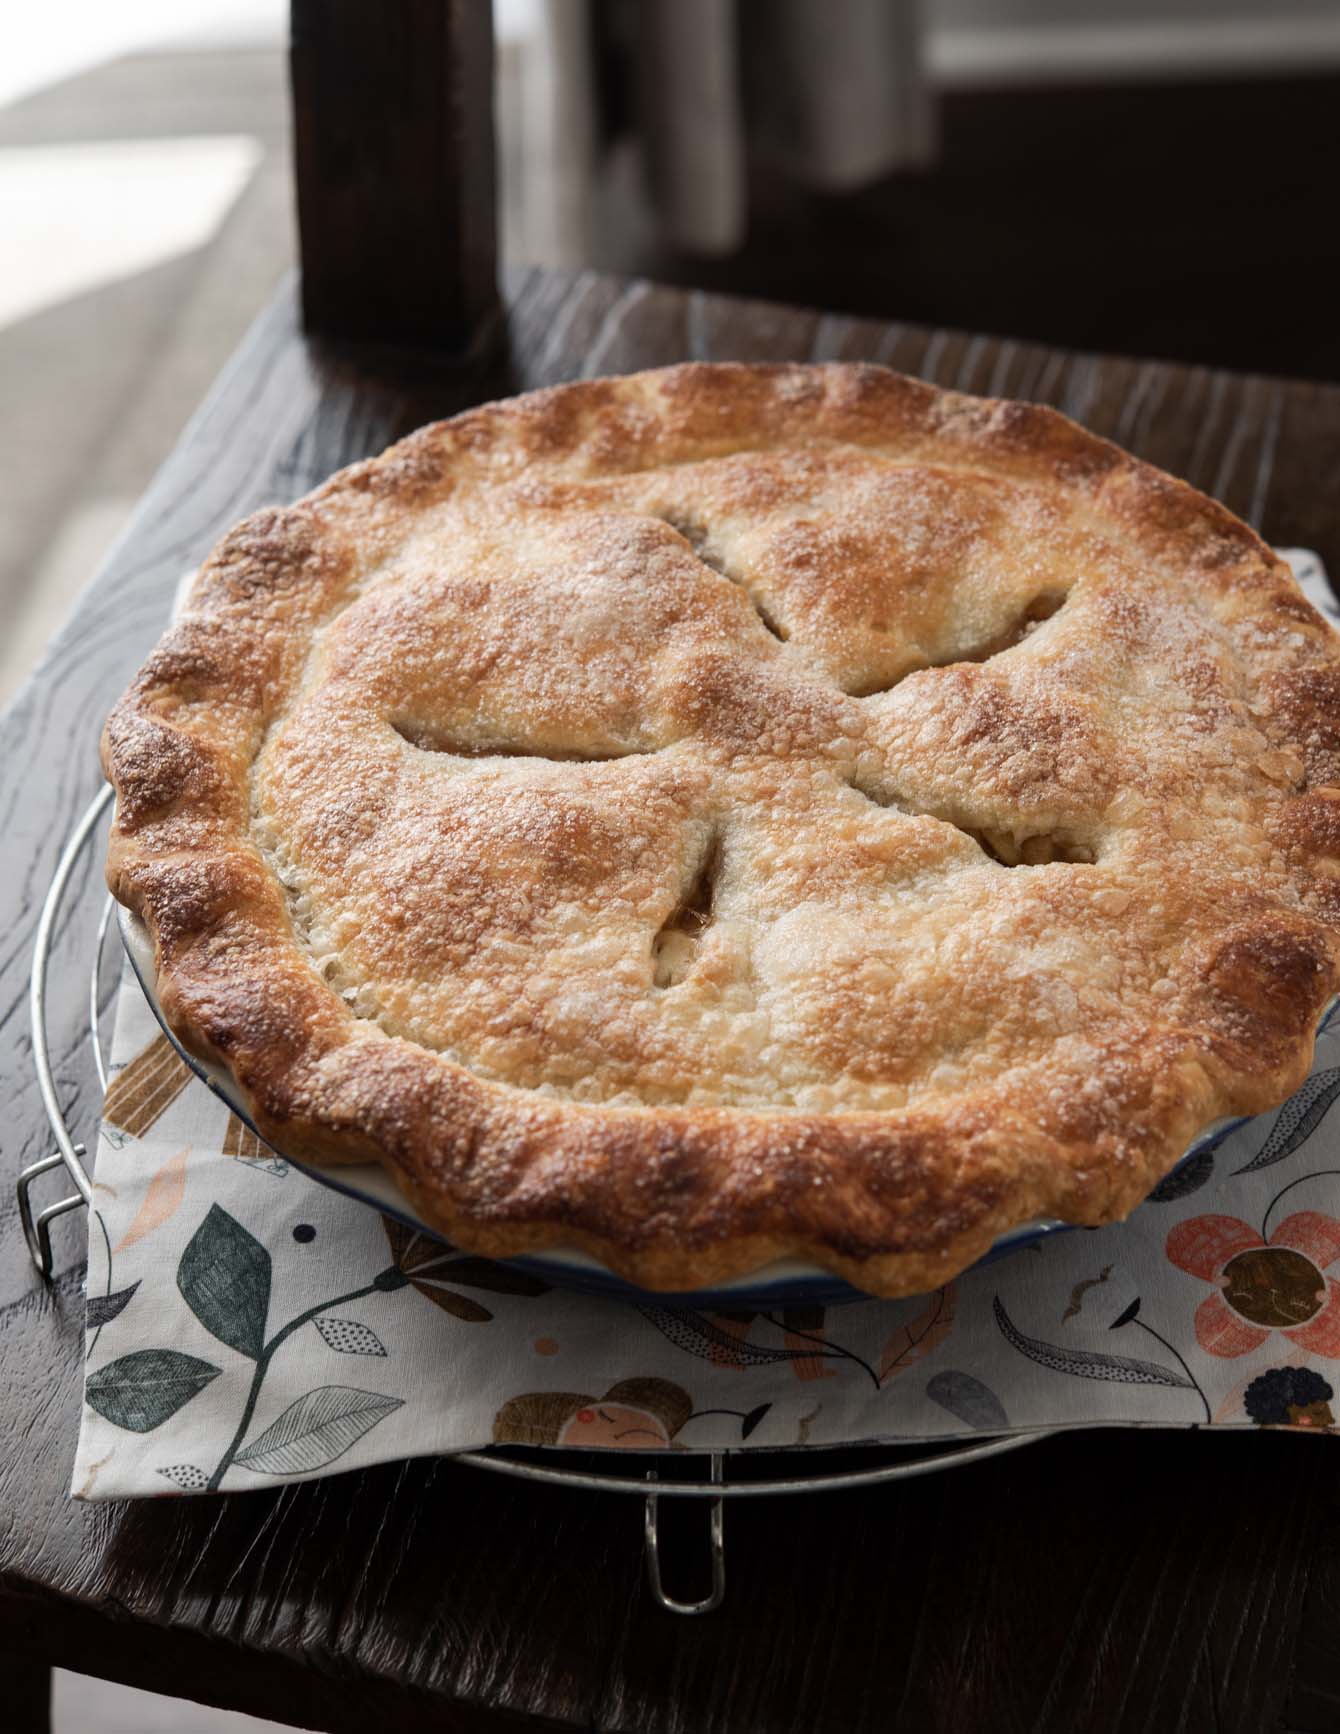 A deep dish apple pie with golden brown crust.